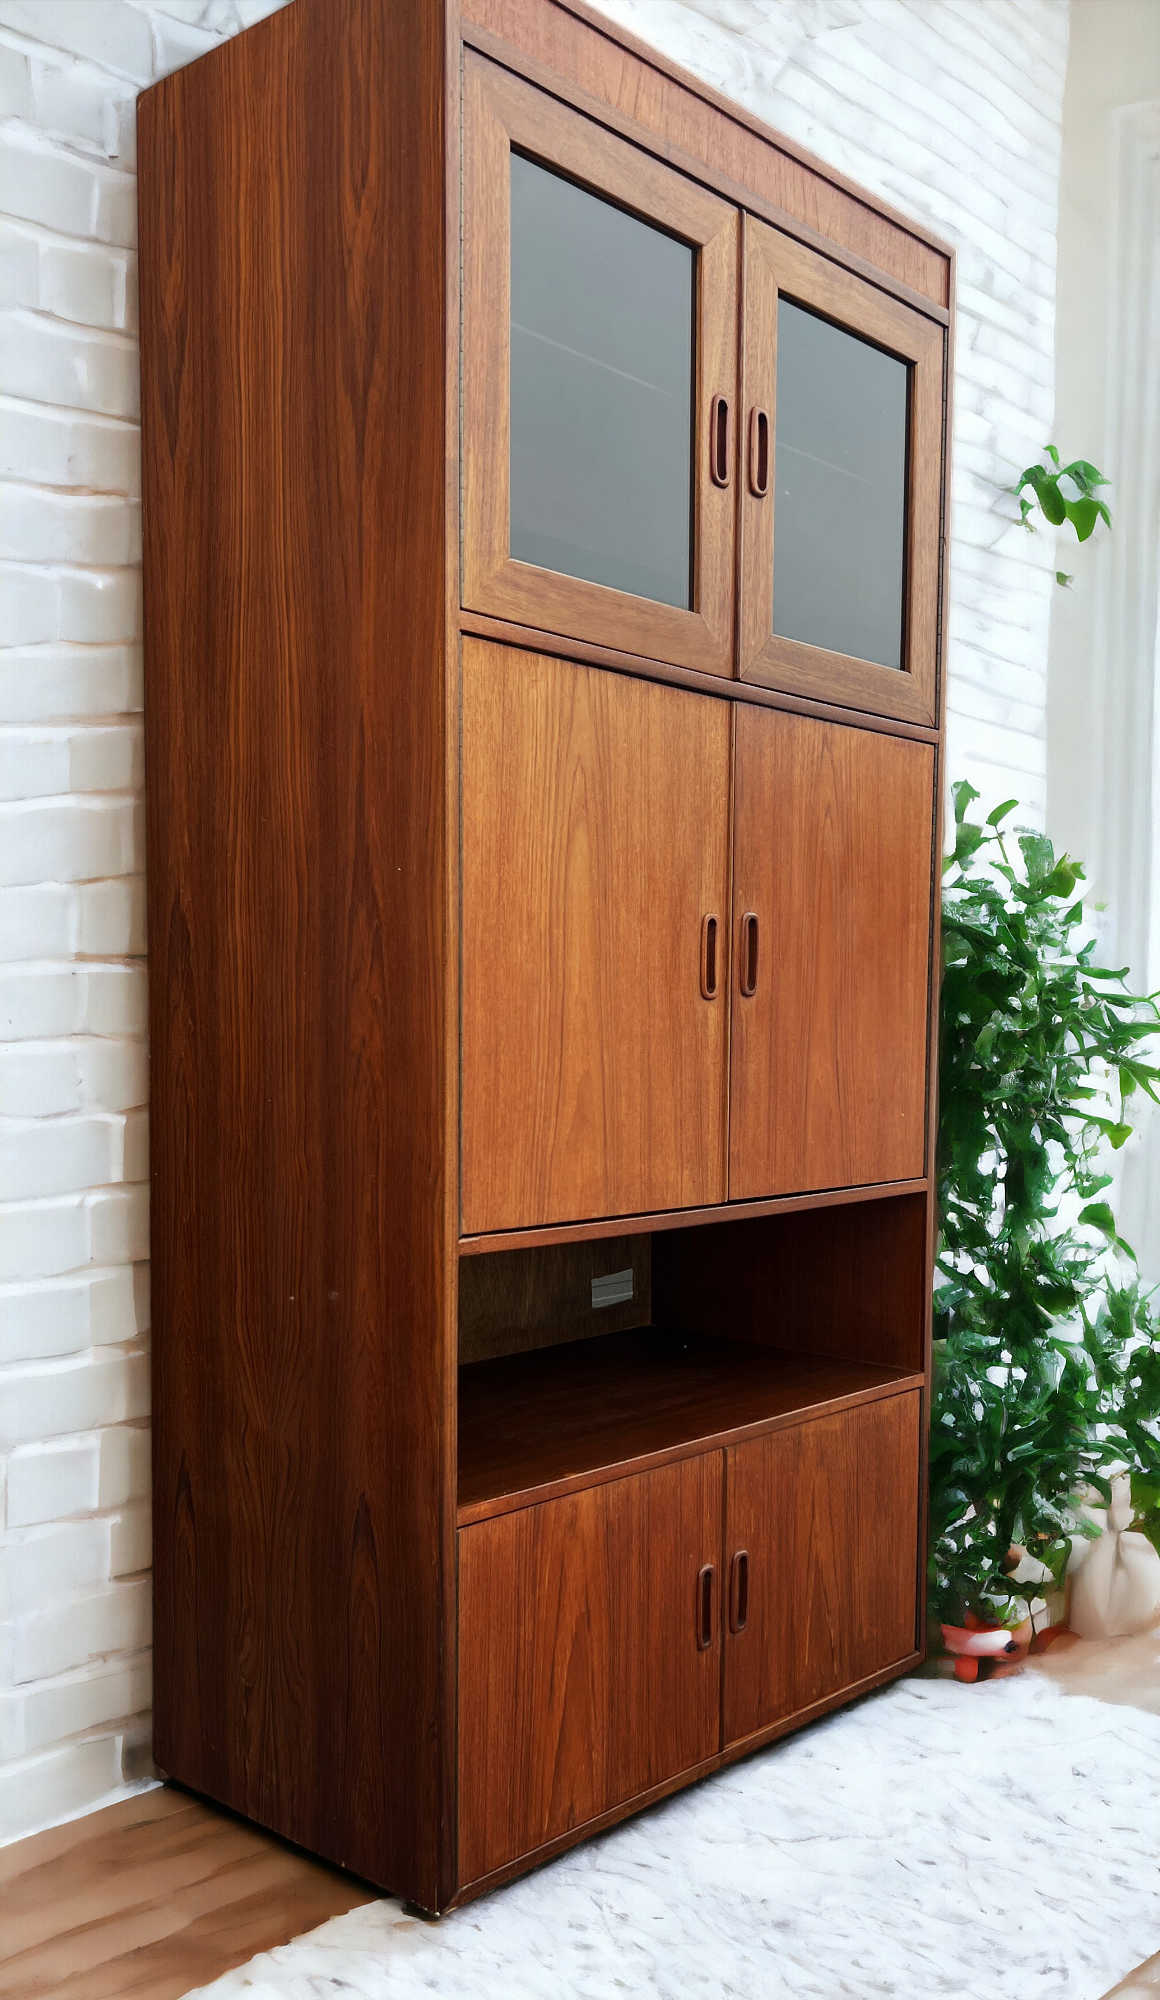 RESTORED Mid Century Modern Teak Tall Cabinet by G Plan with Lighting (2 available)